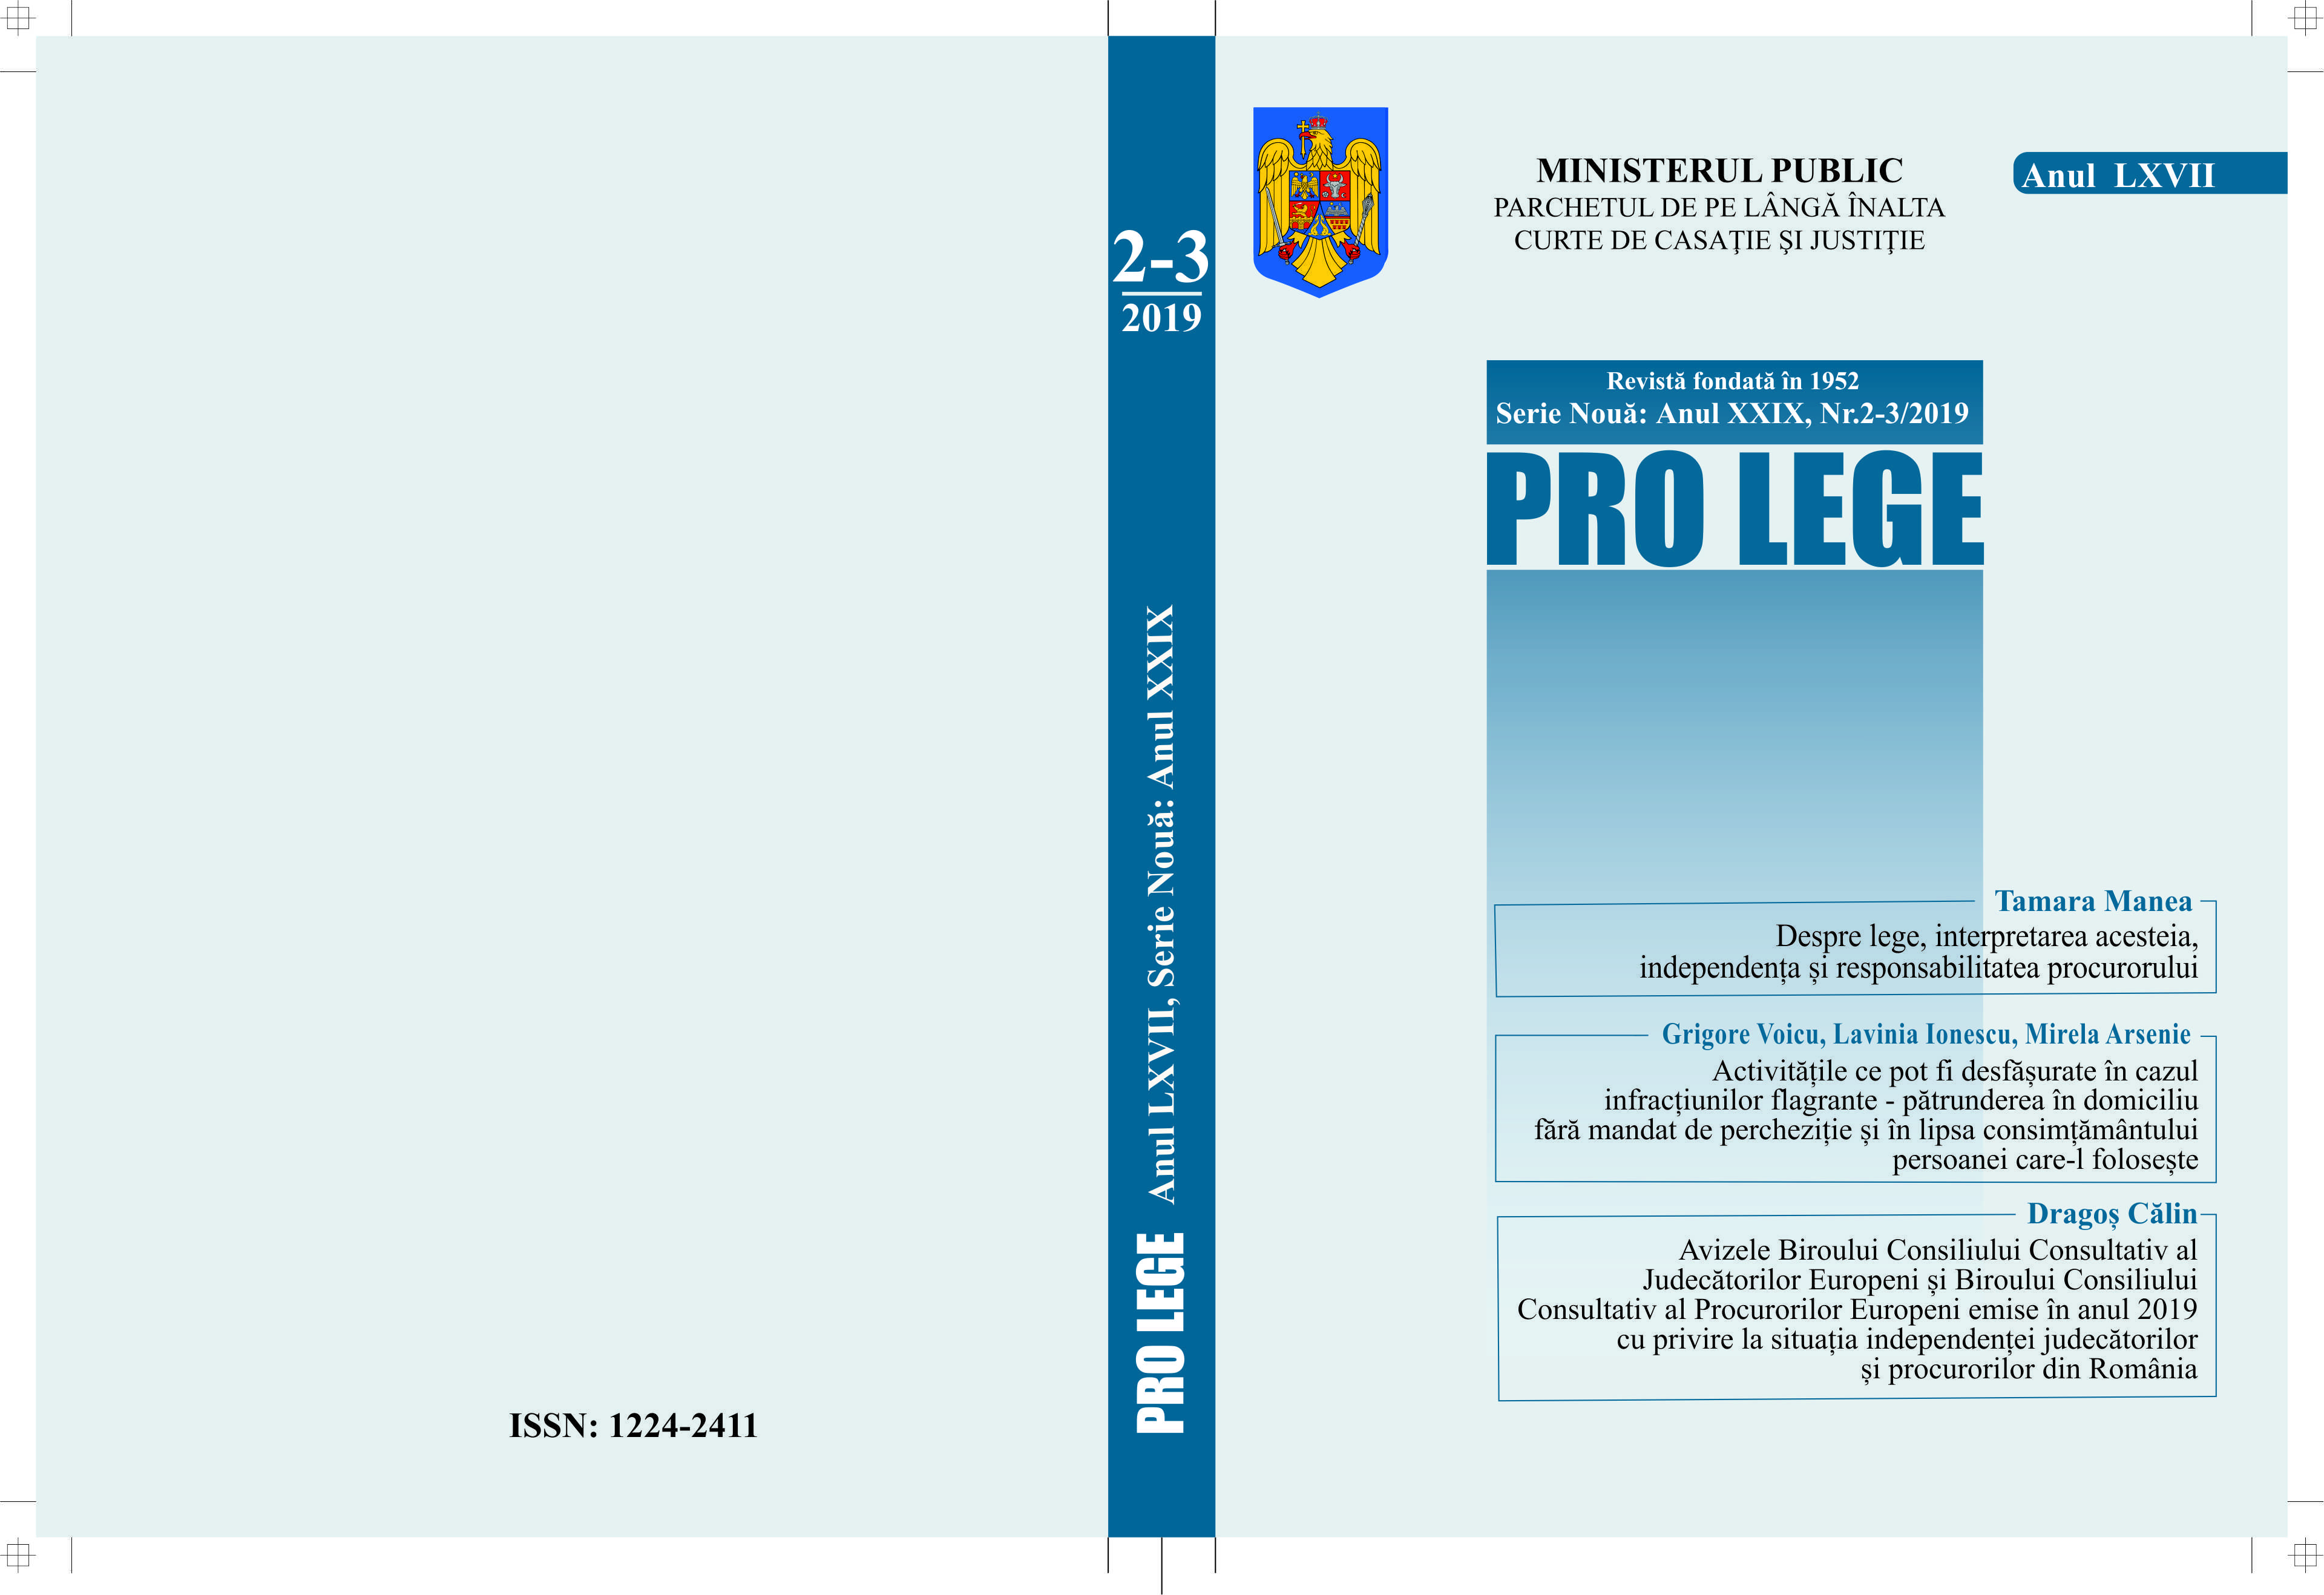 The case of Thomas Lubanga Dyilo – the order to pay civil damages in the amount of $ 10,000,000 for war crimes Cover Image